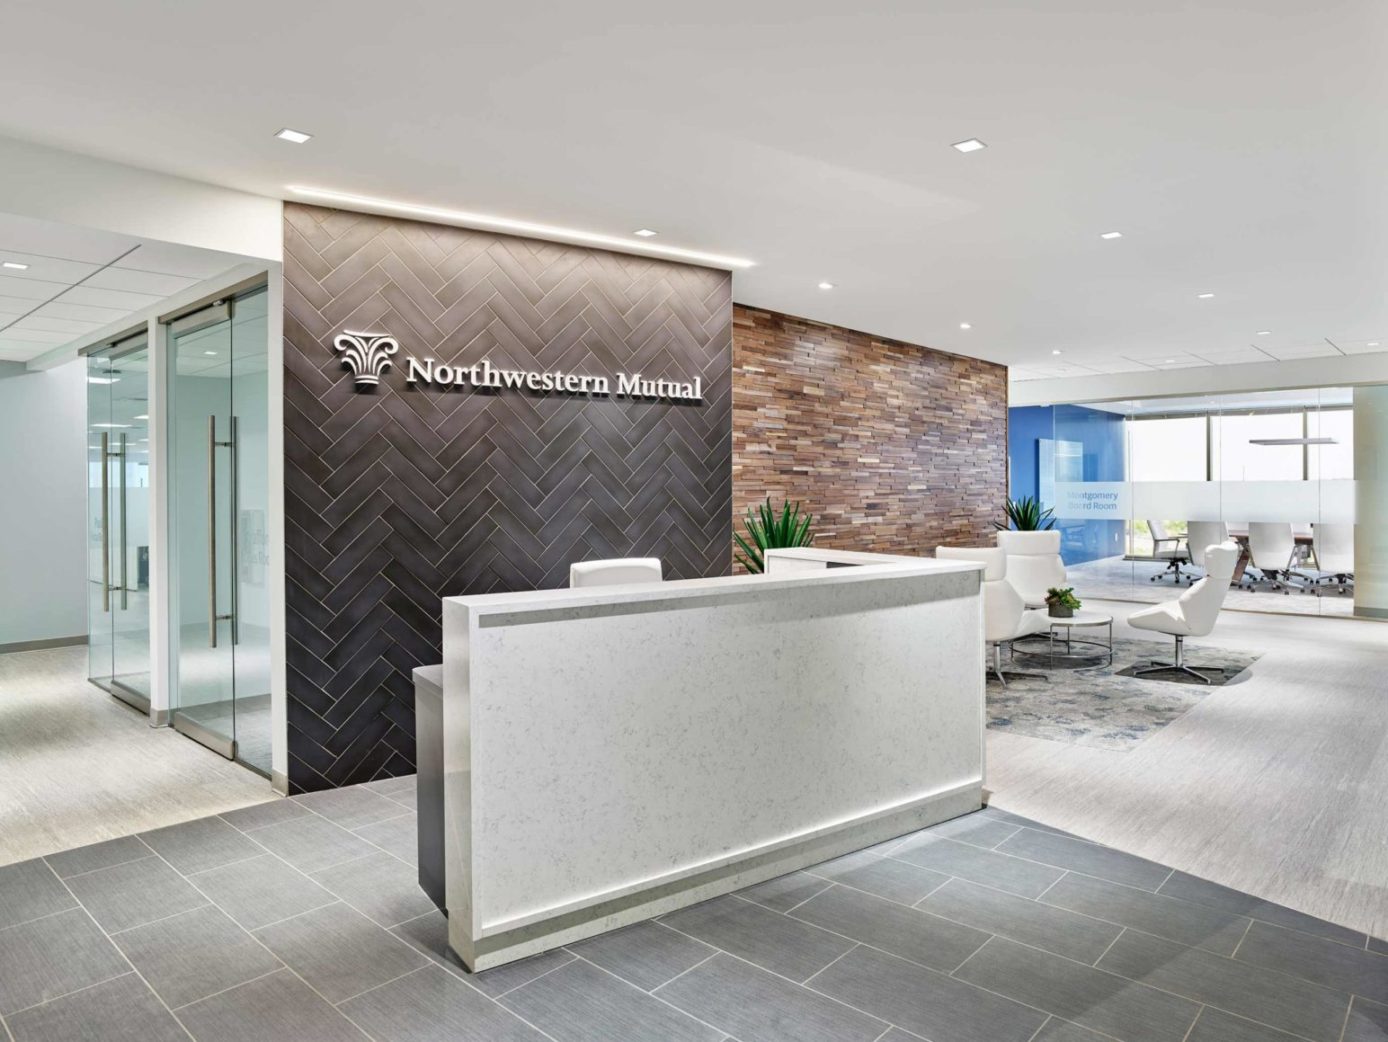 Designing an Inviting and Modern Workplace for Northwestern Mutual